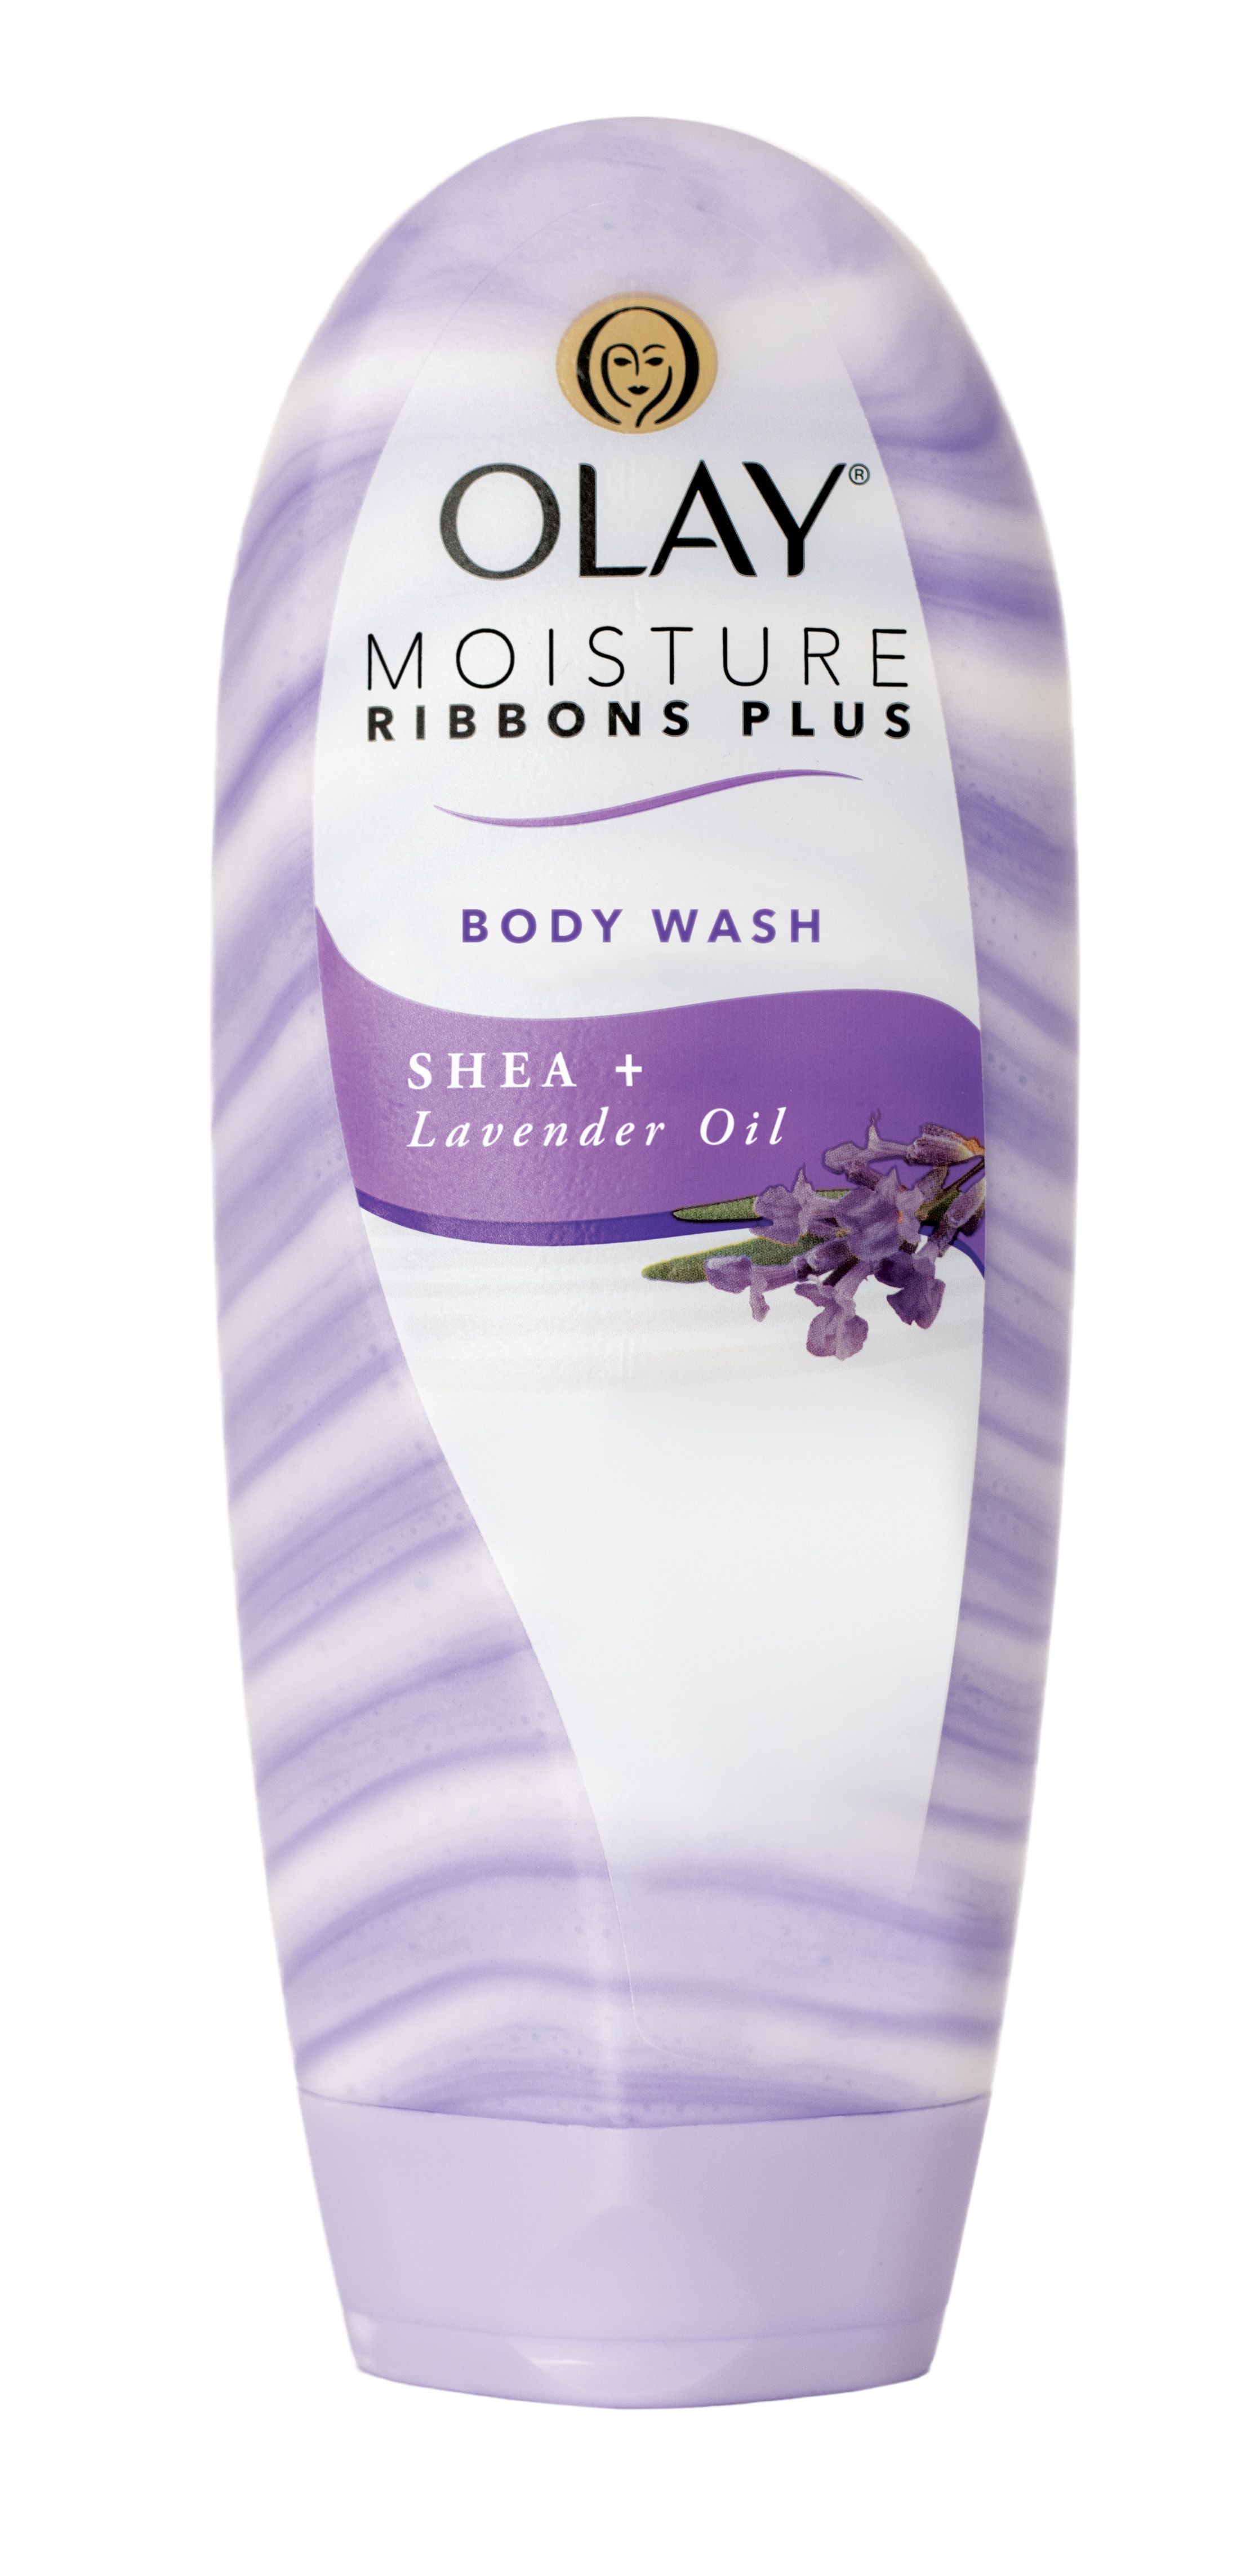 Olay Ribbons Body Wash in Shea + Lavender Oil 